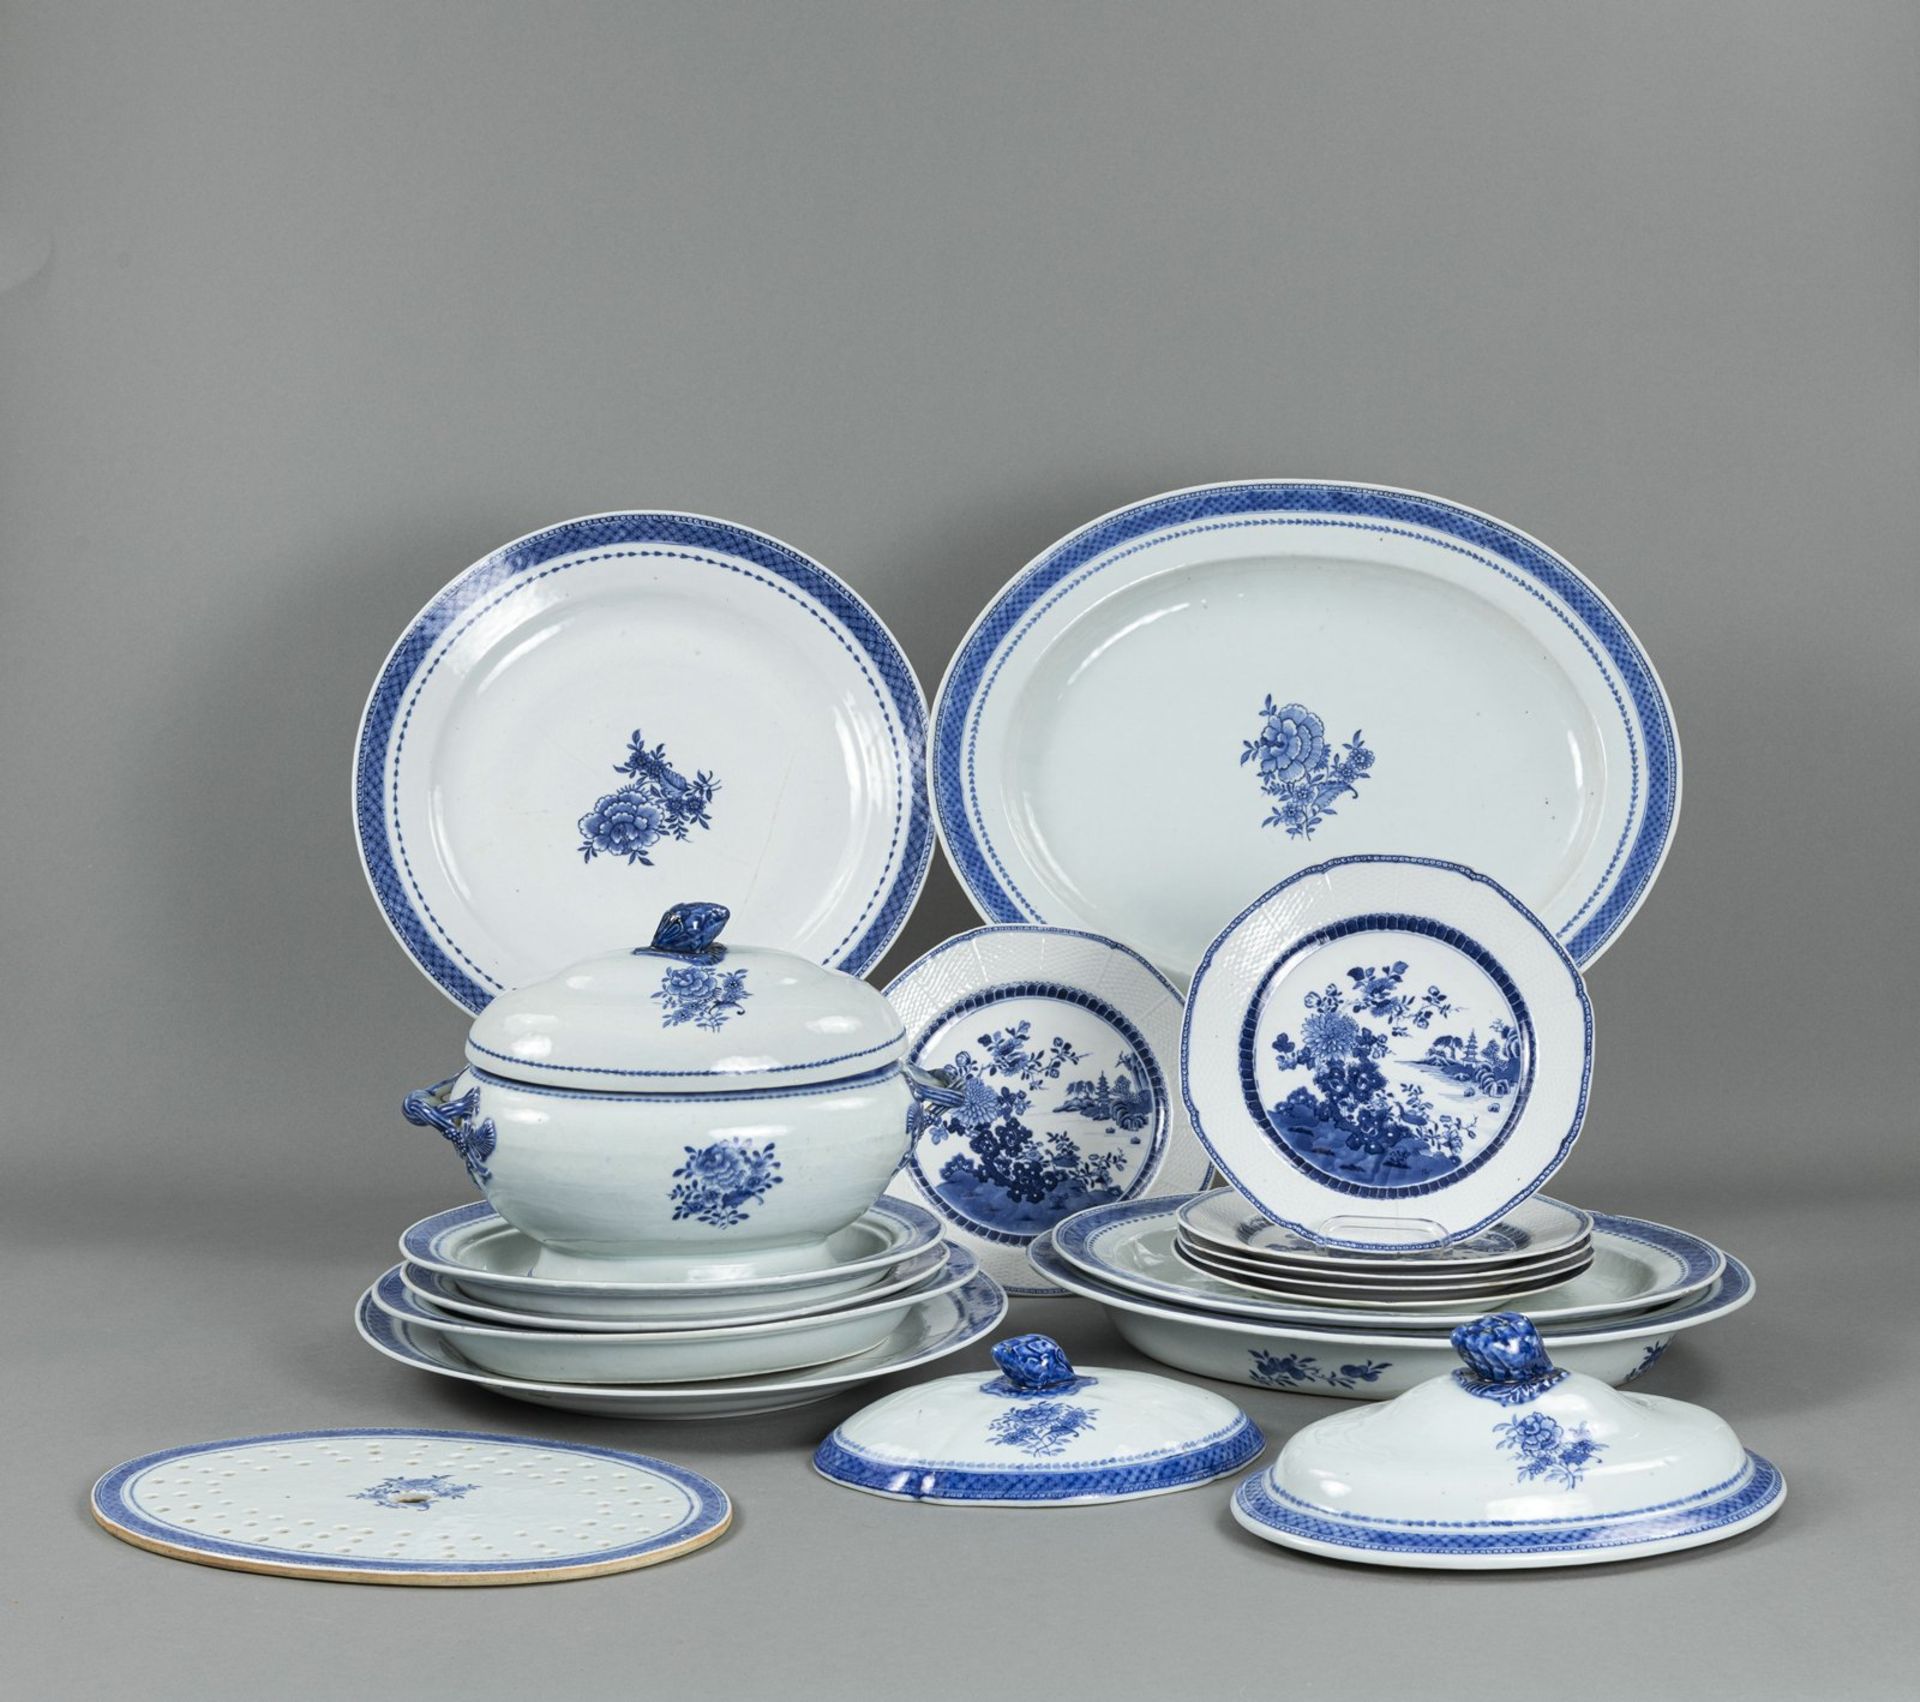 A 19-PIECE DINNERWARE SET WITH A TUREEN, TWO COVERS, WARMING PLATES AND DISHES